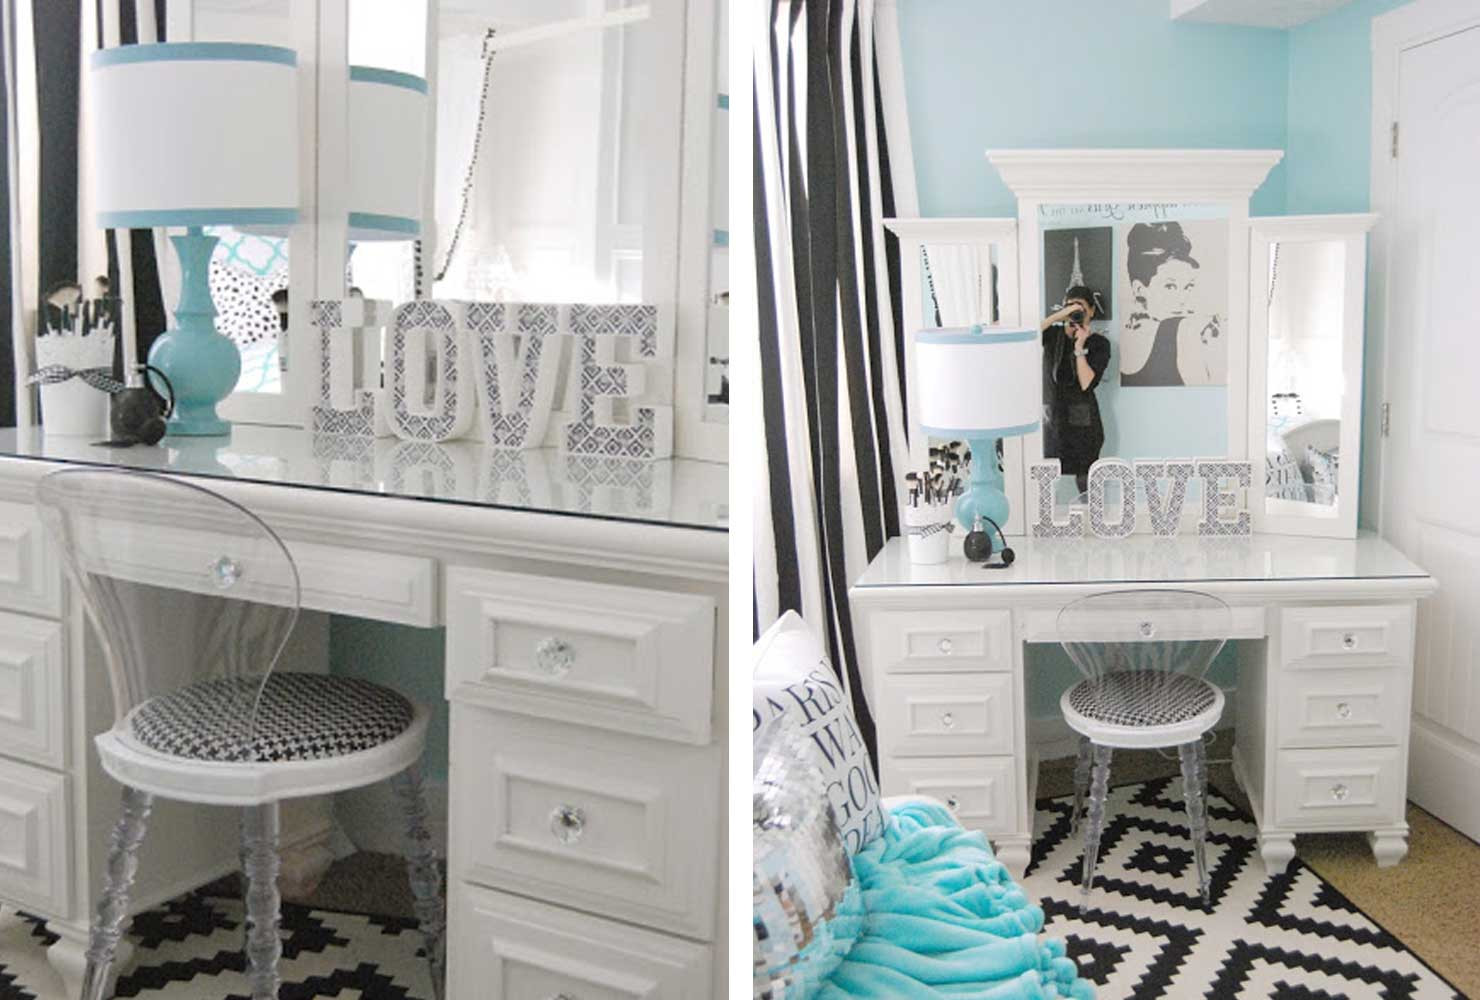 Teen Room Decor DIY
 26 DIY Teen Room Decor Ideas to Personalize Any Space